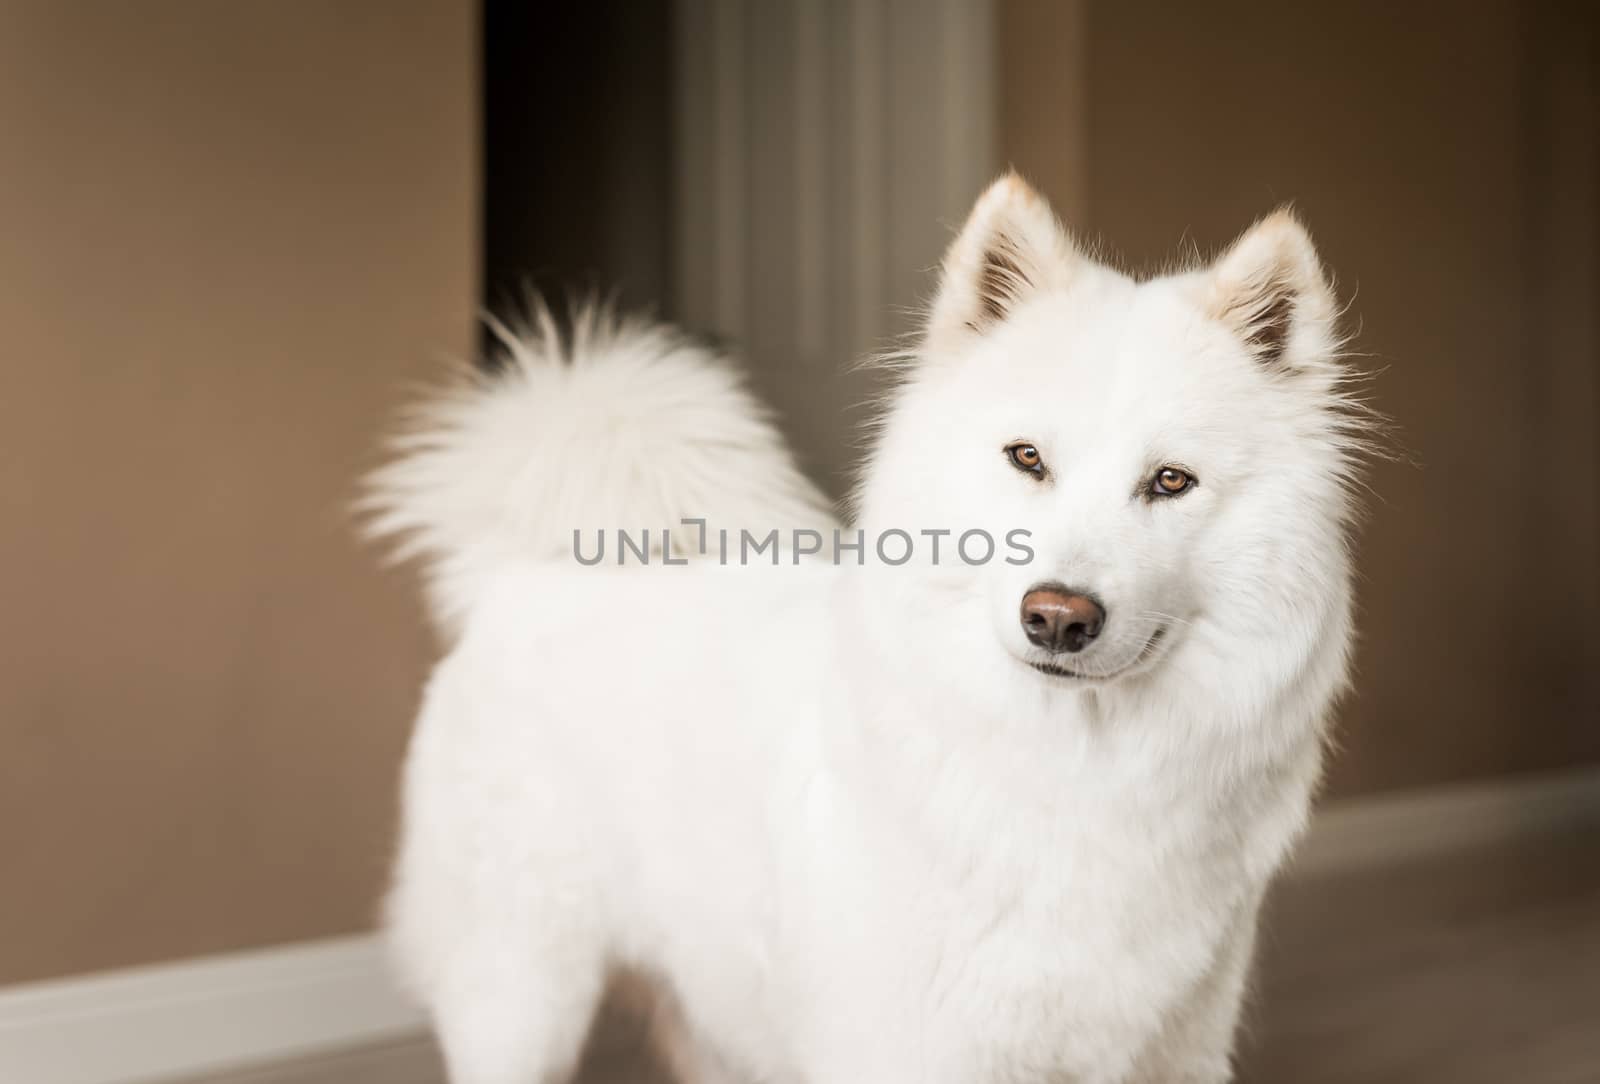 Cute, fluffy white Samoyed dog looks at the camera with a curious expression.